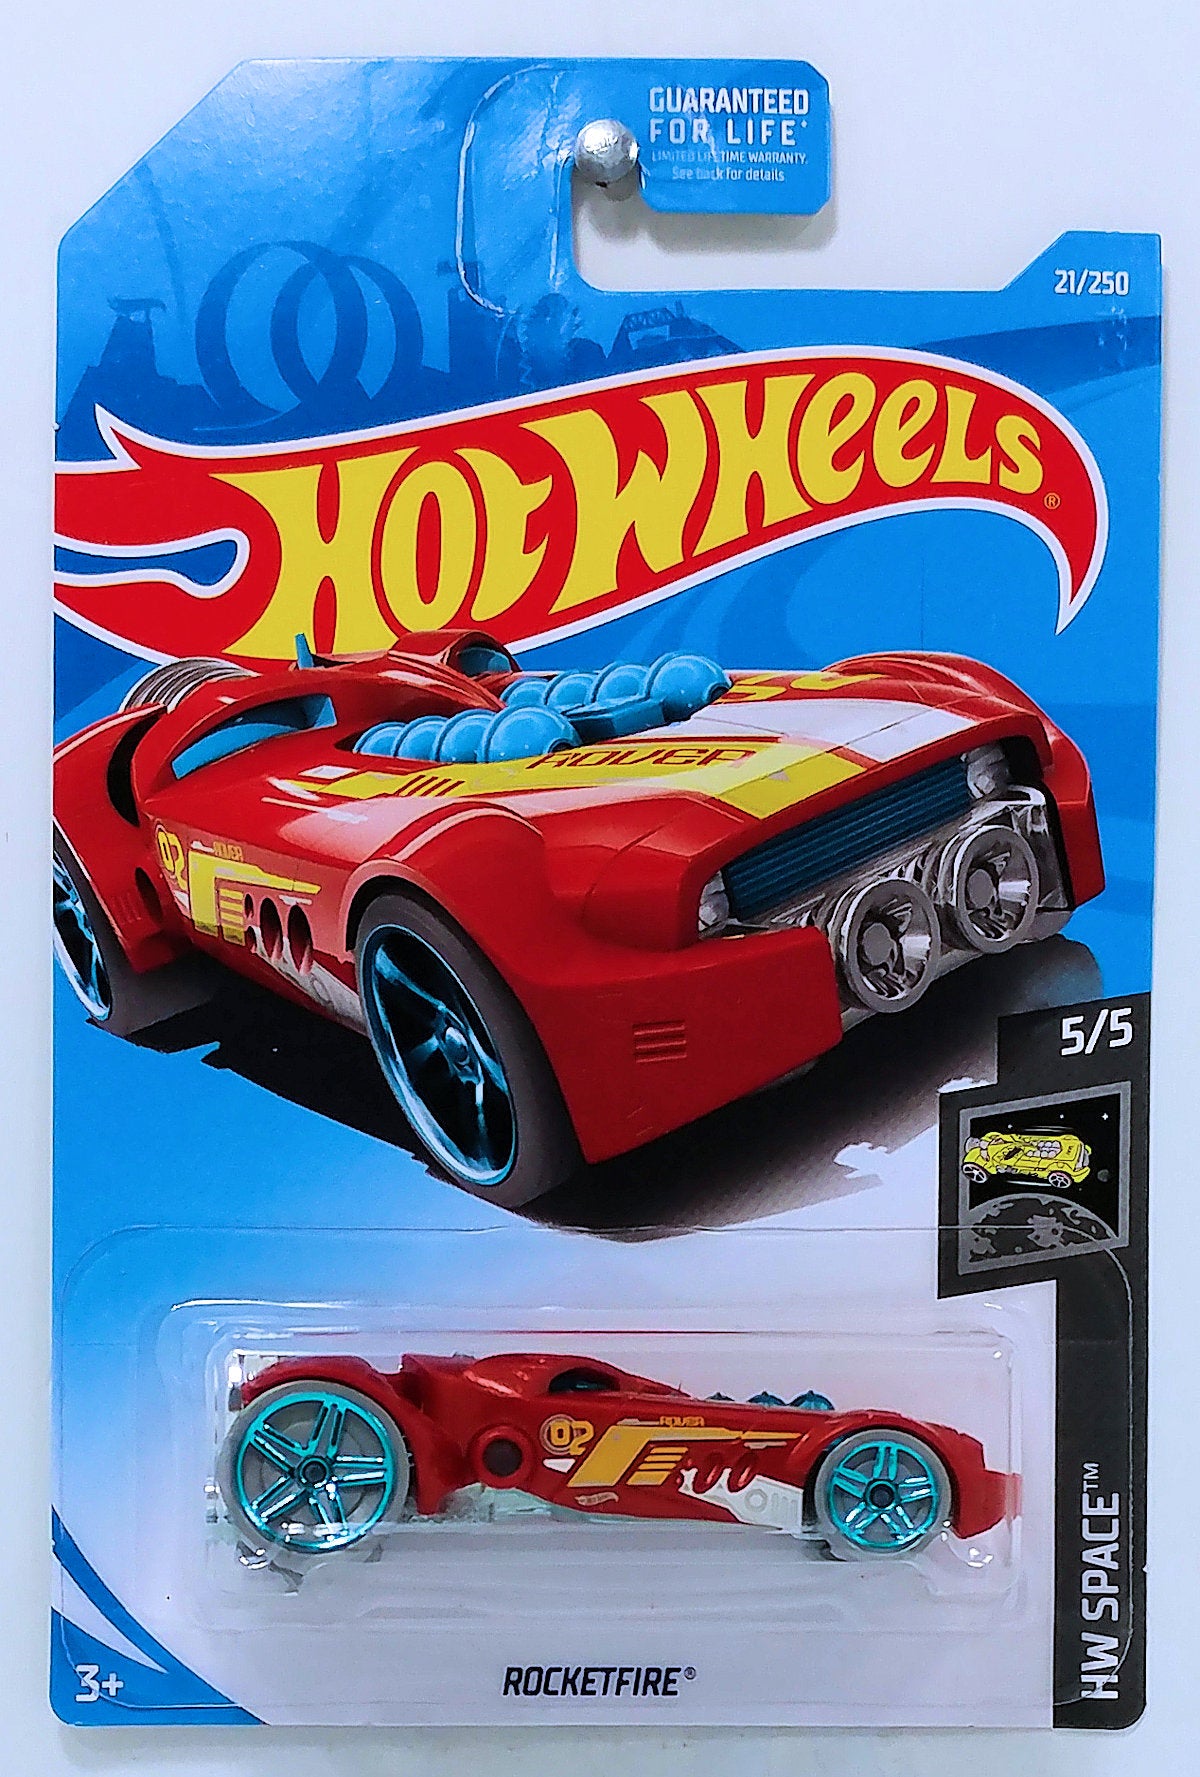 Hot Wheels 2019 - Collector # 021/250 - HW Space 5/5 - Rocketfire - Red